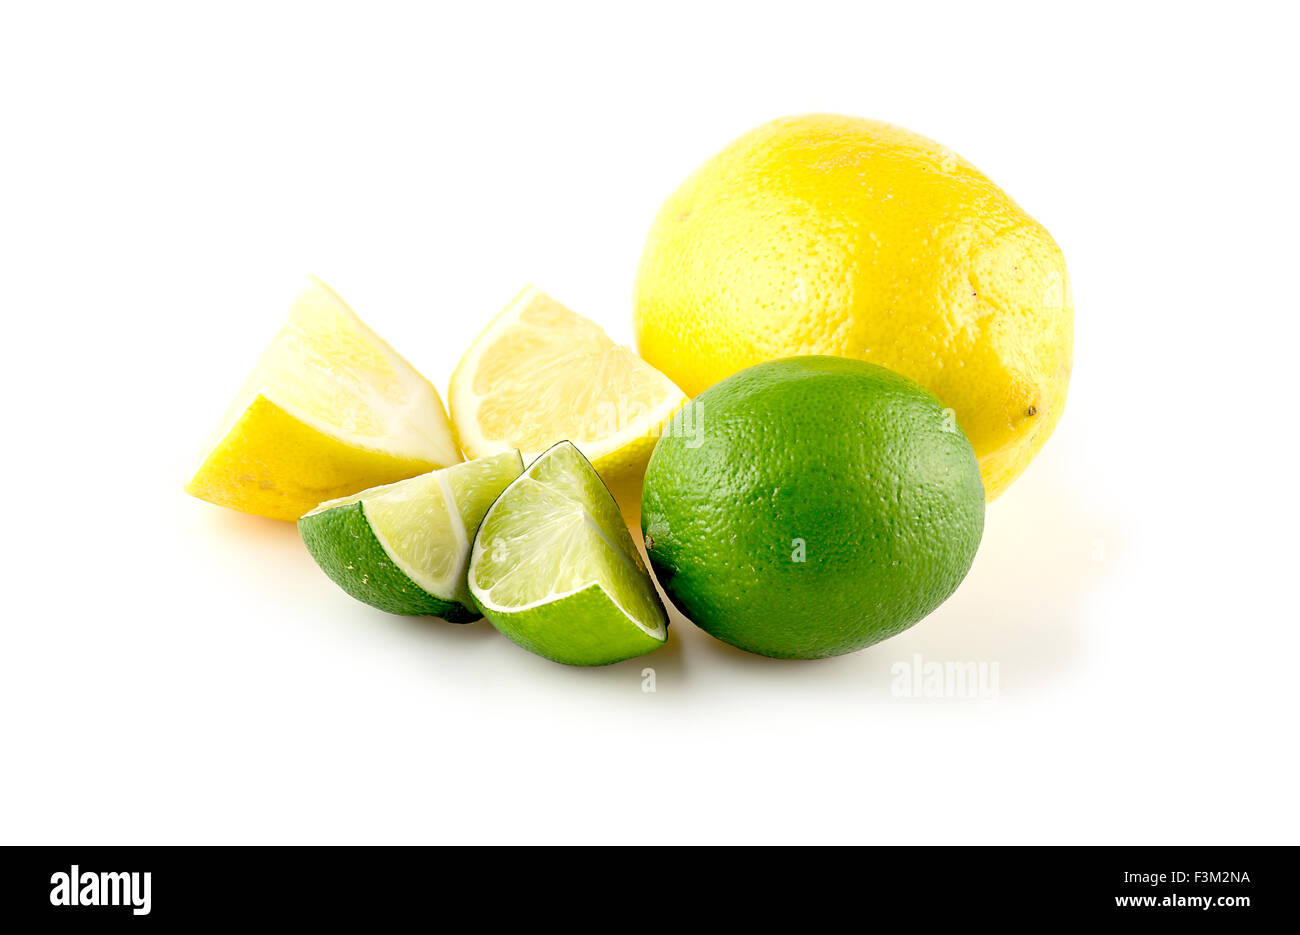 Diced lemons and limes, isolated against white Stock Photo